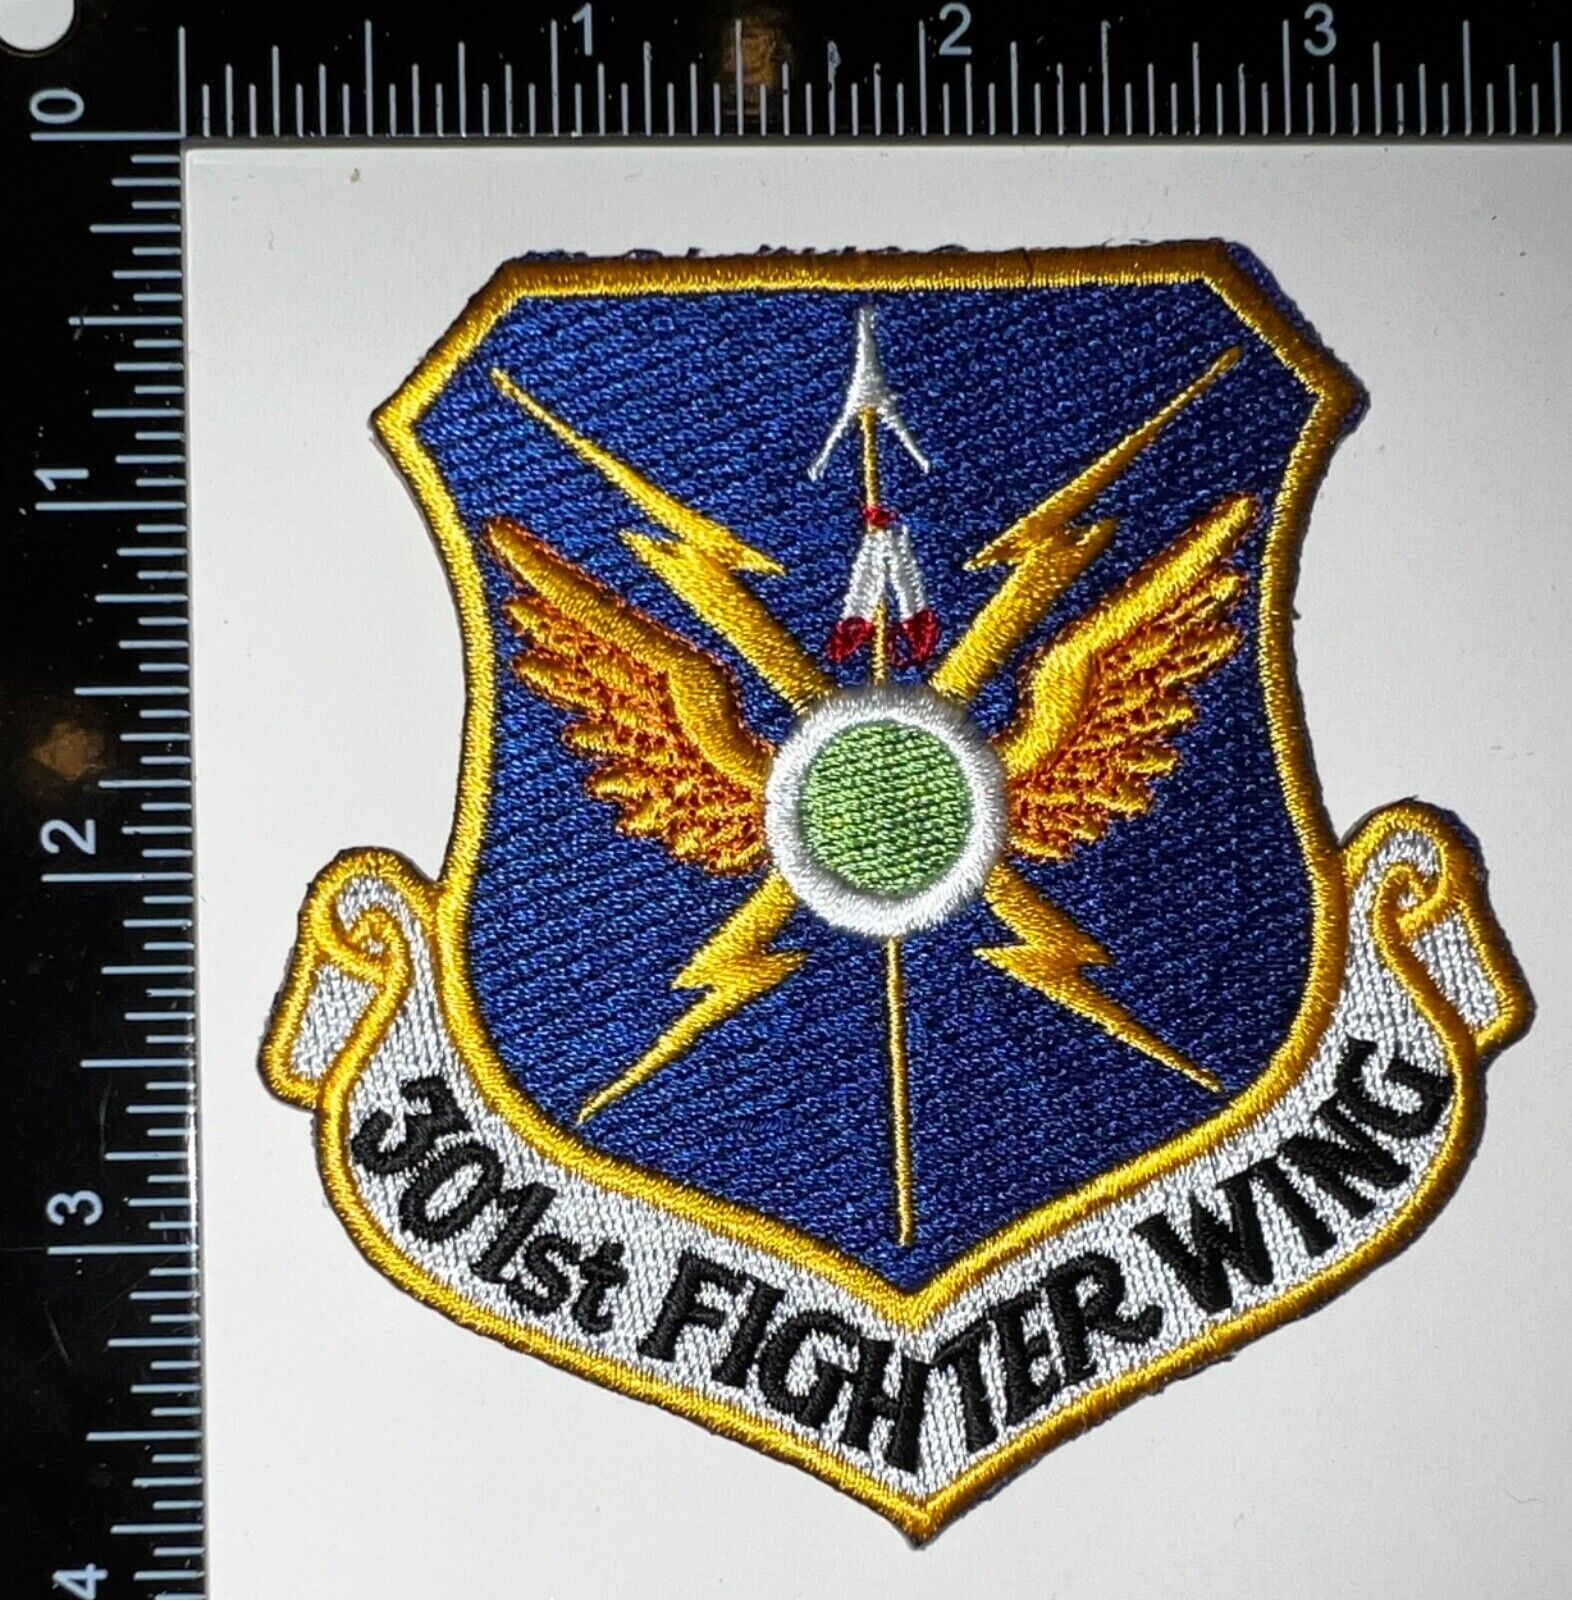 USAF US Air Force 301st Fighter Wing Patch